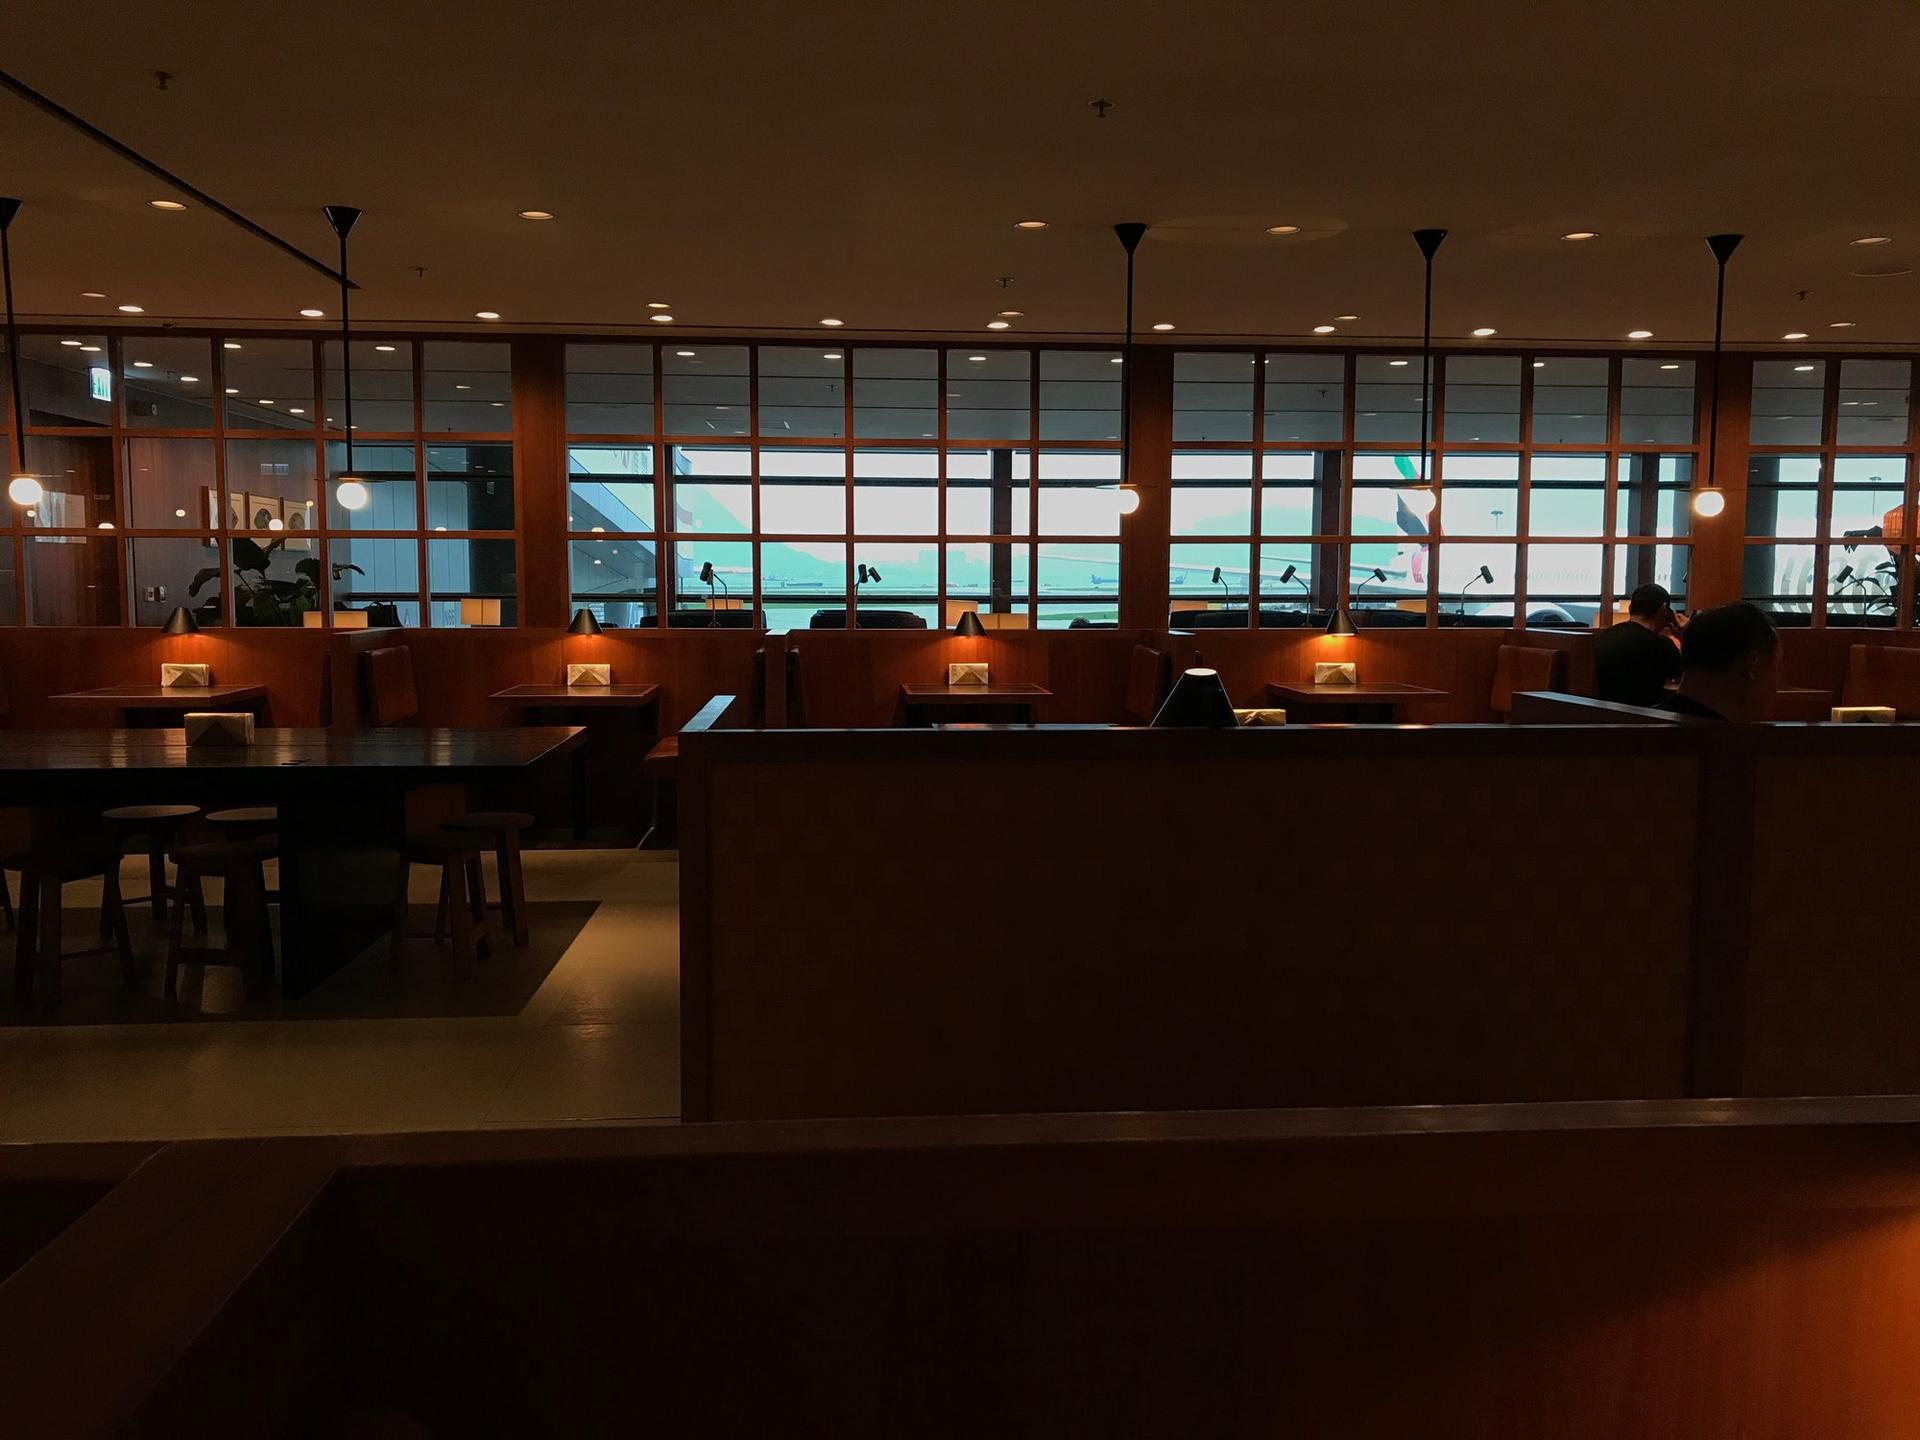 Cathay Pacific The Pier Business Class Lounge image 11 of 61